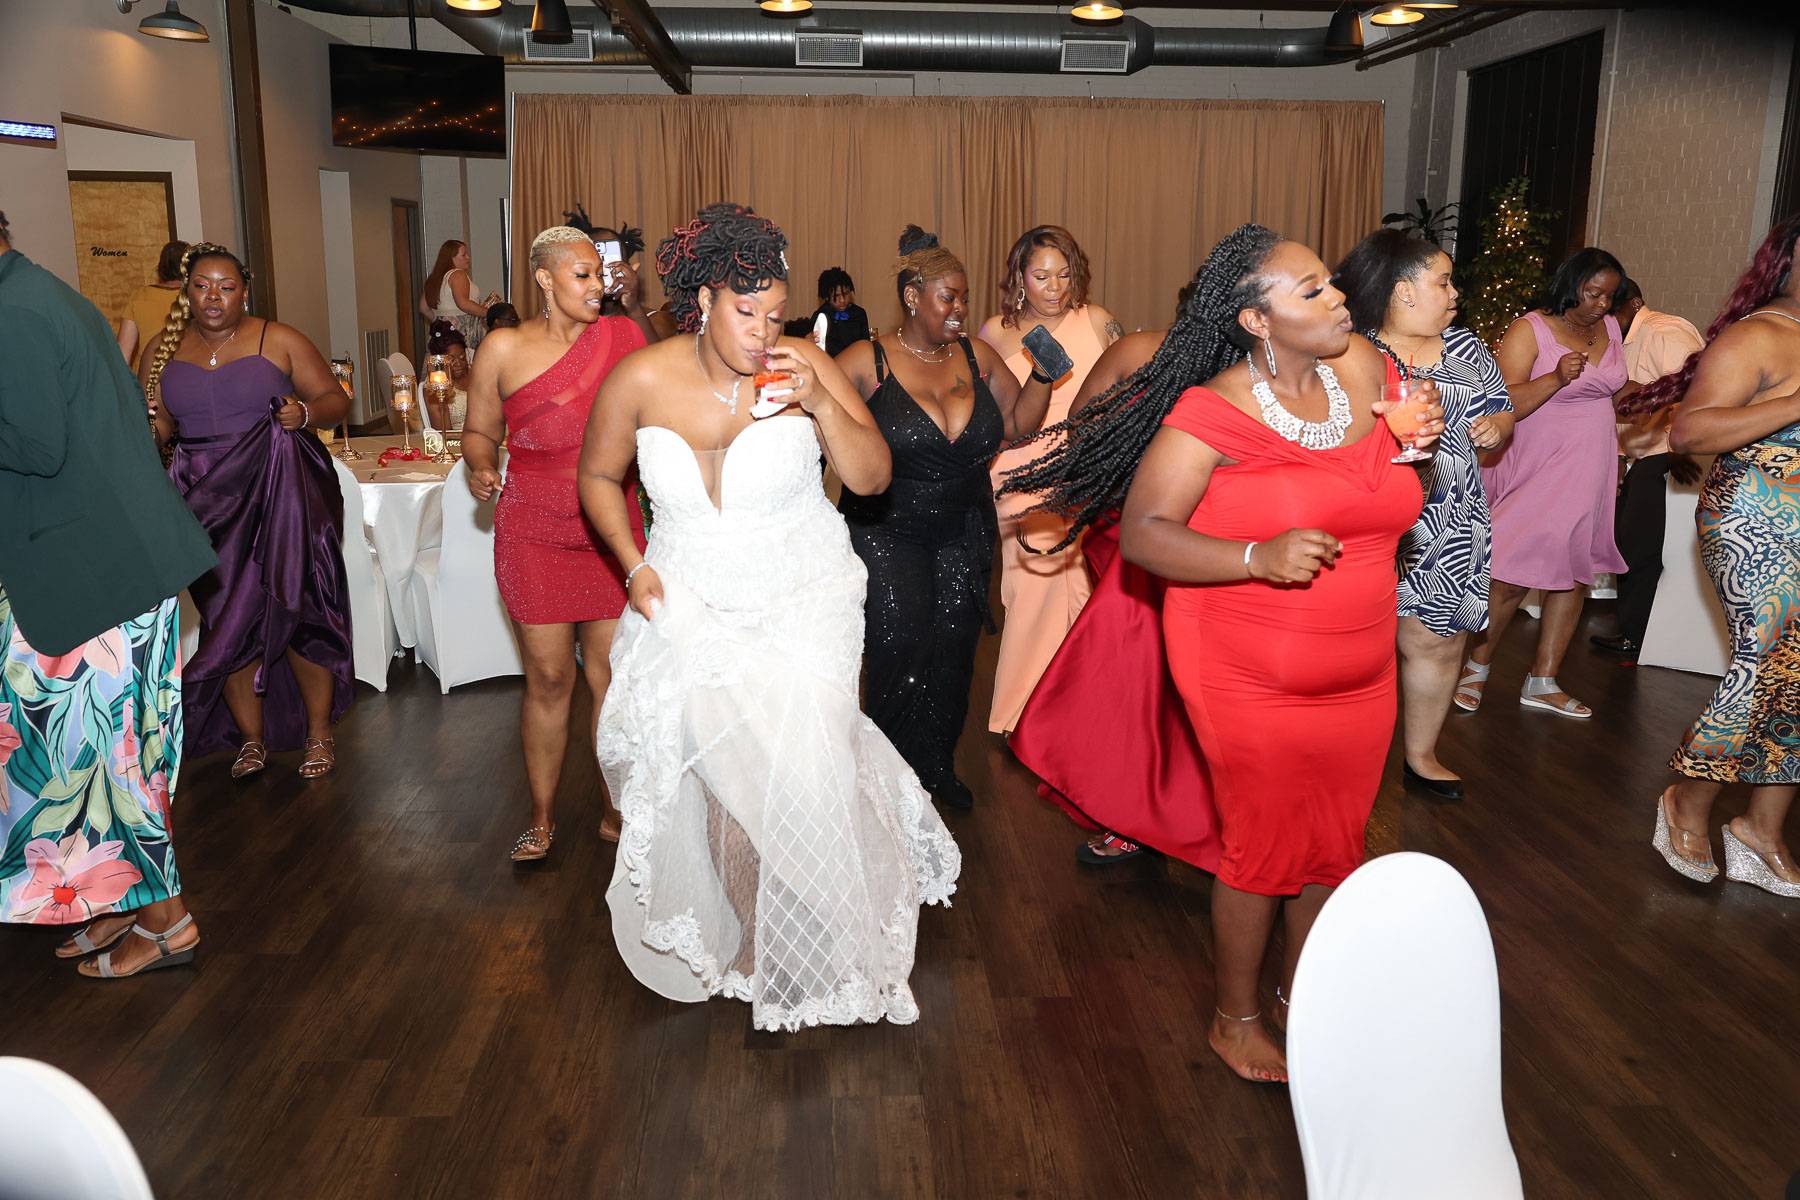 The bride and guests dancing with the same moves